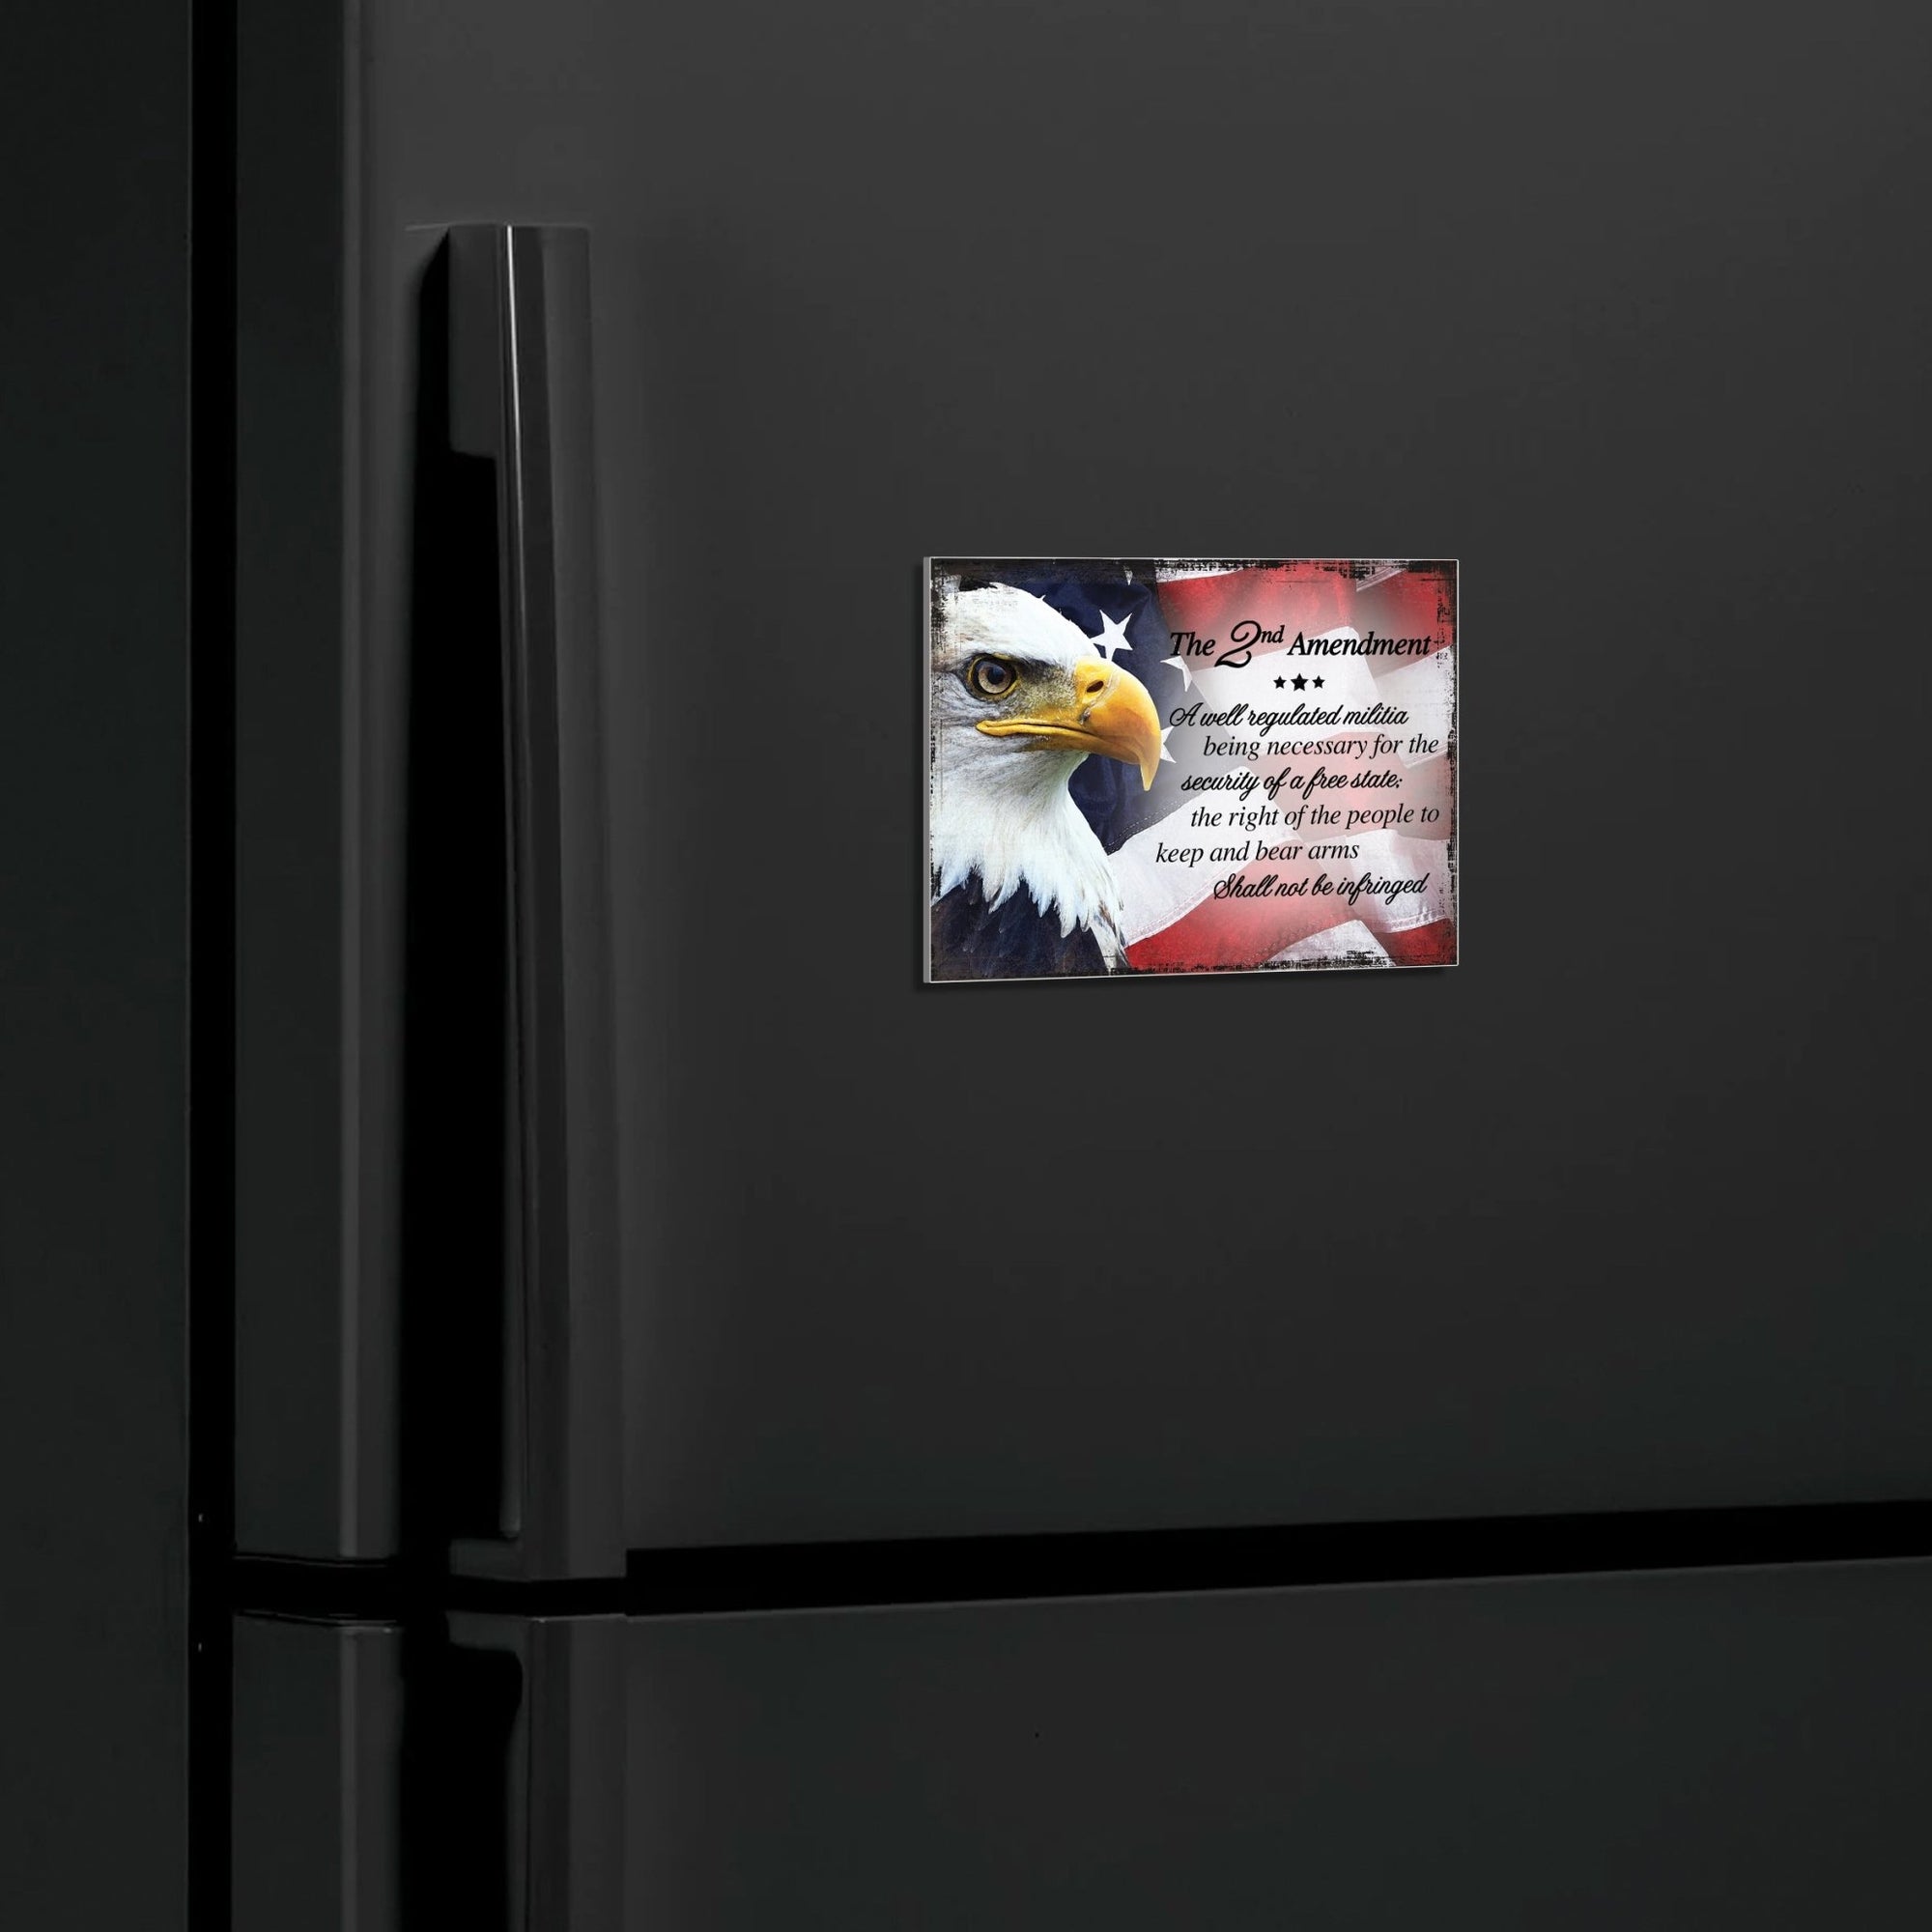 American Flag Veterans Day Patriotic Refrigerator Magnet Vintage Décor Gift Ideas - Eagle The 2nd Amendment - LifeSong Milestones